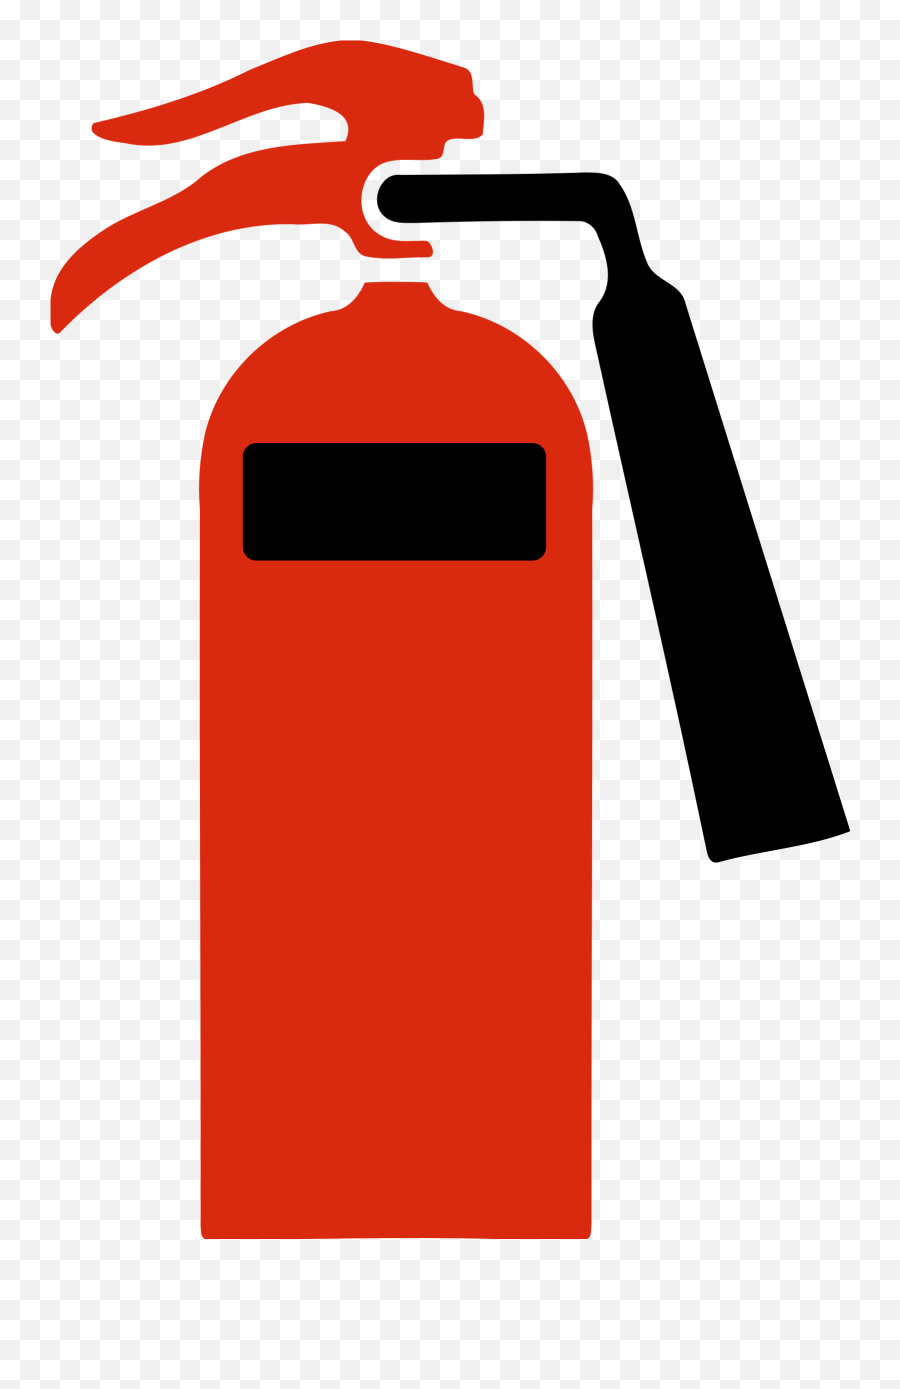 Library Of Wall E Clip Free Download Fire Extinguisher Png - Clip Art Fire Extinguisher,Wall E Png